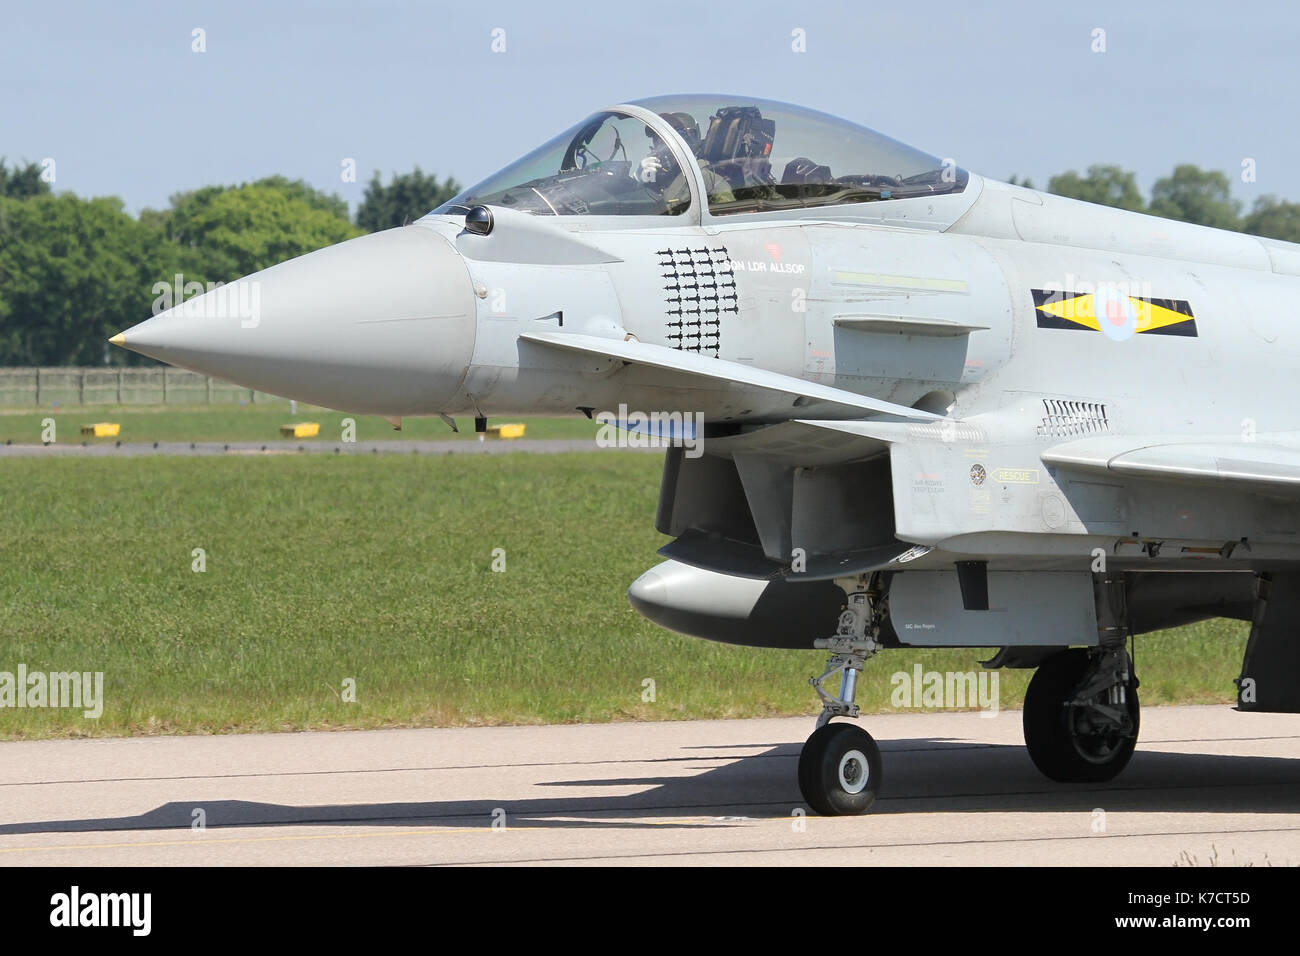 11 Squadron Typhoon taxiing back to the Coningsby shelters. Aircraft still shows mission markings from Operation Ellamy and sorties over Libya. Stock Photo